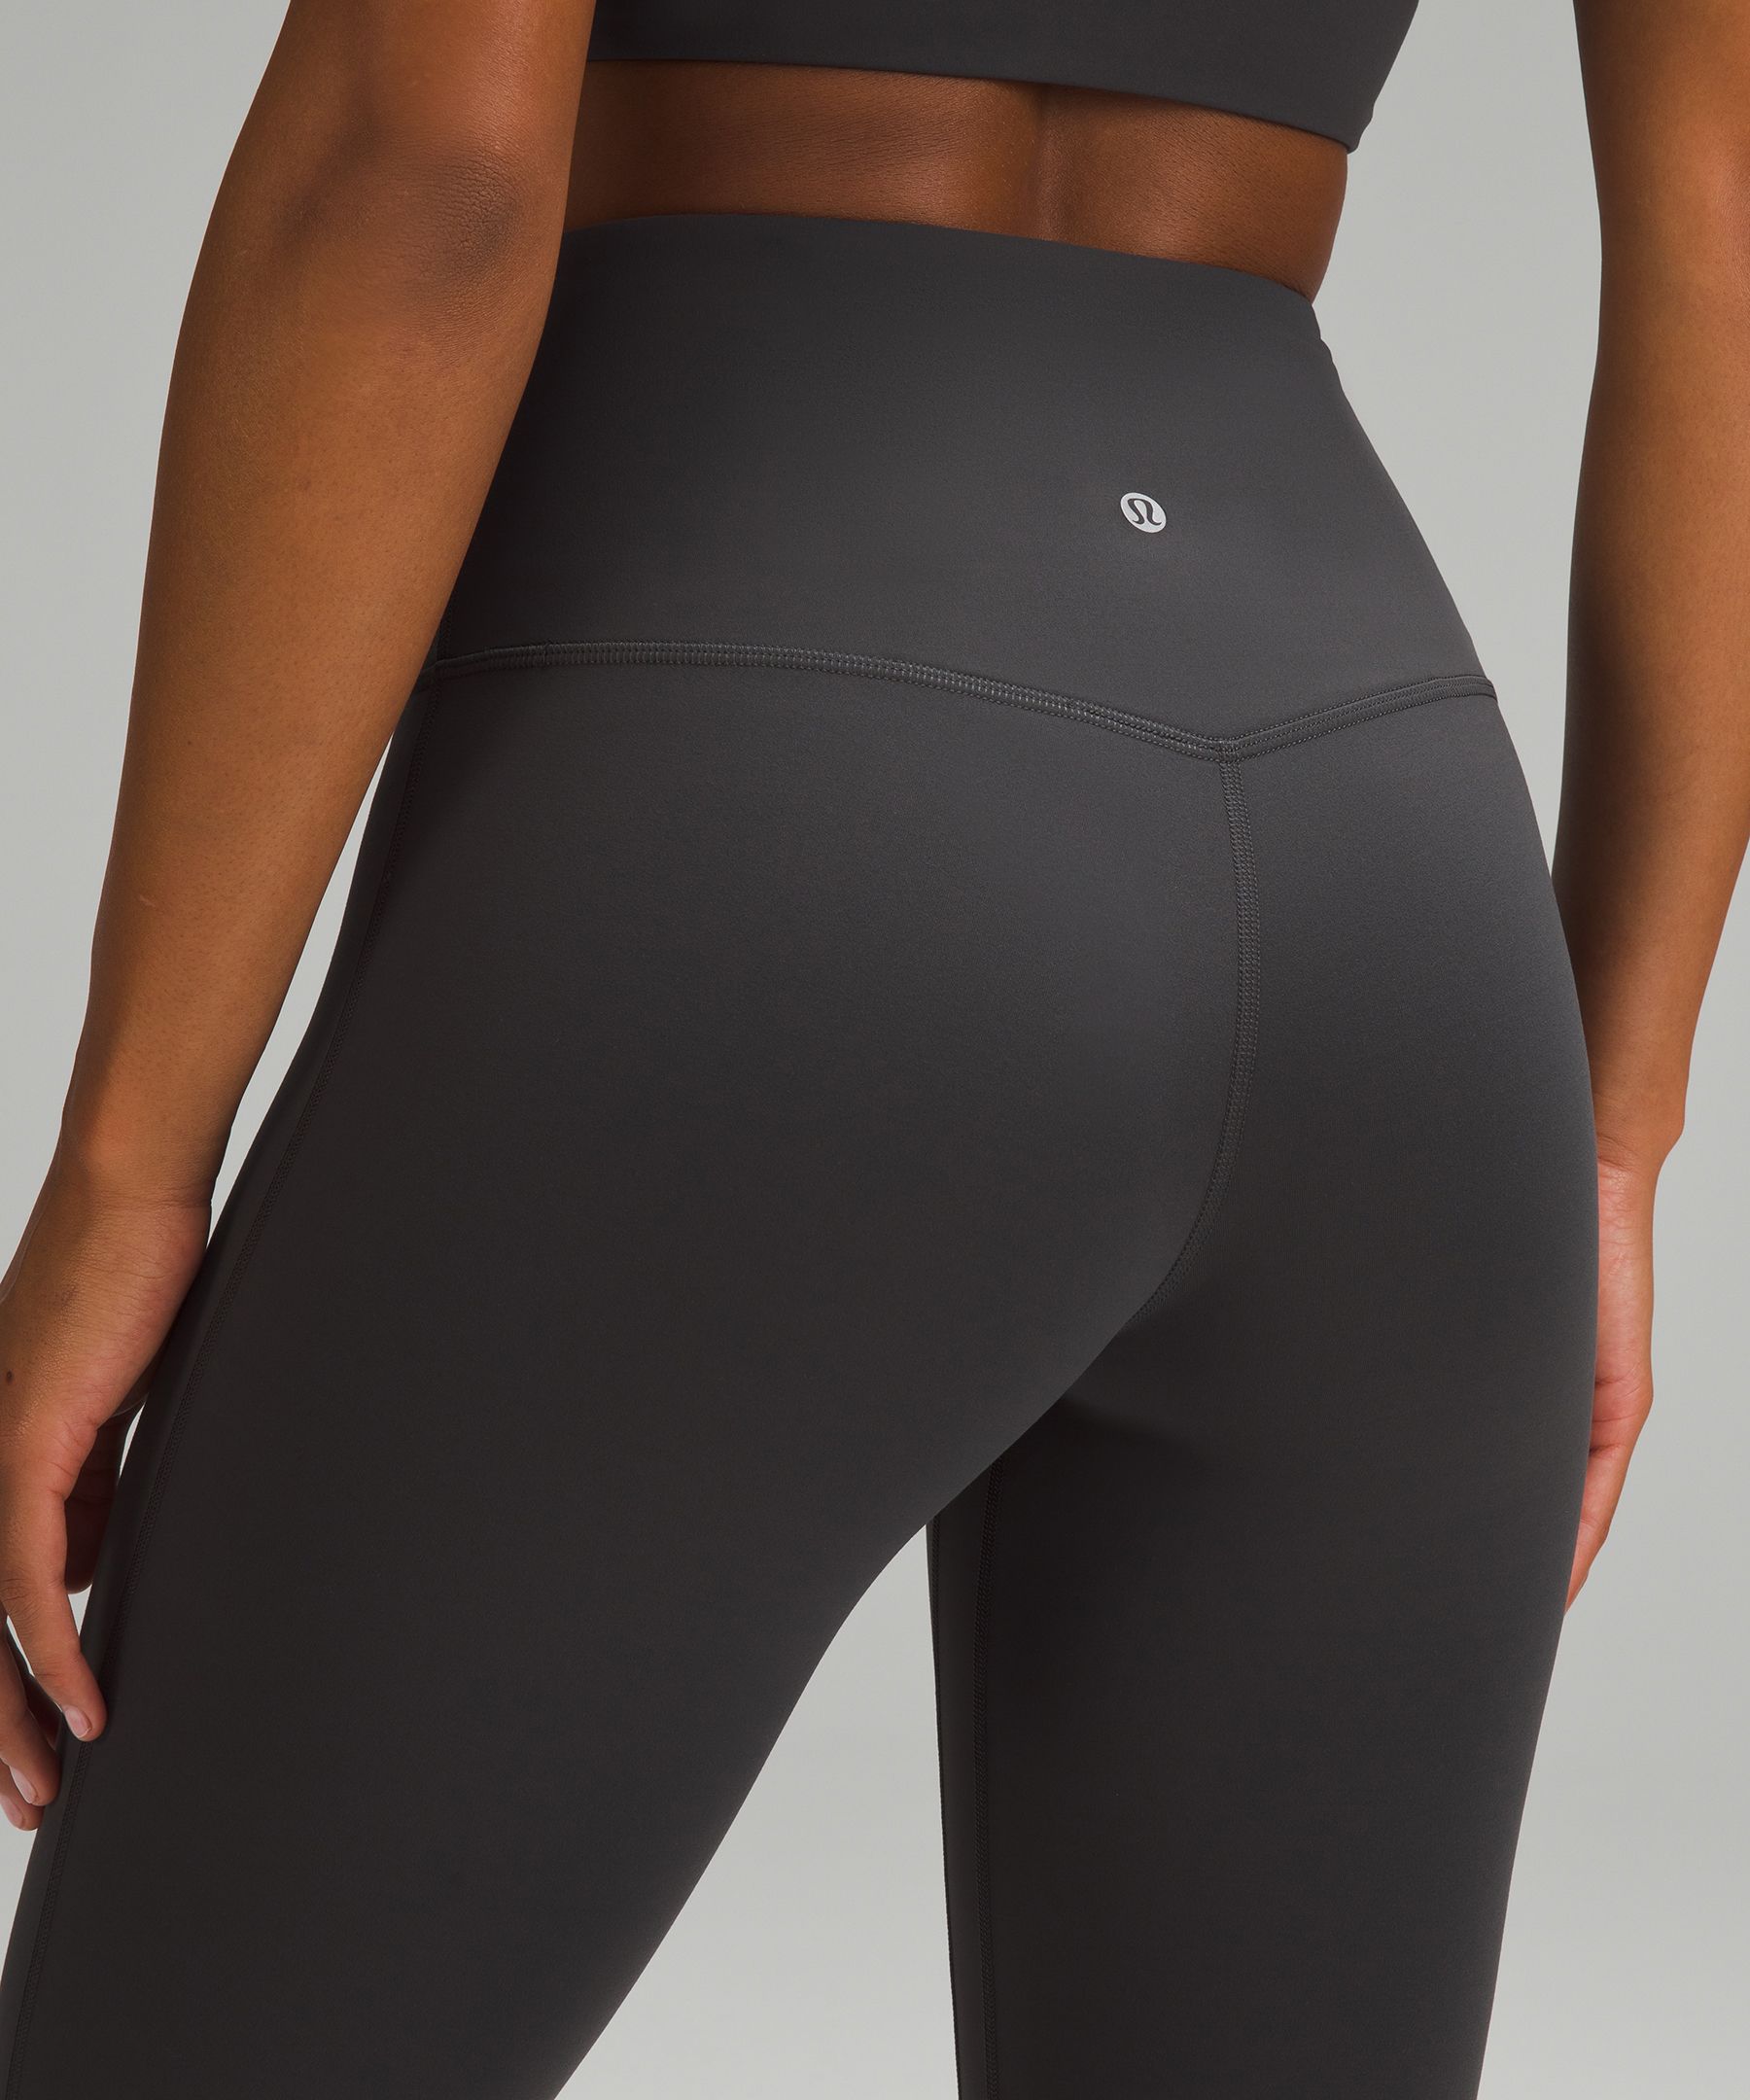 Comparing @lululemon groove pant with the align mini flare. I